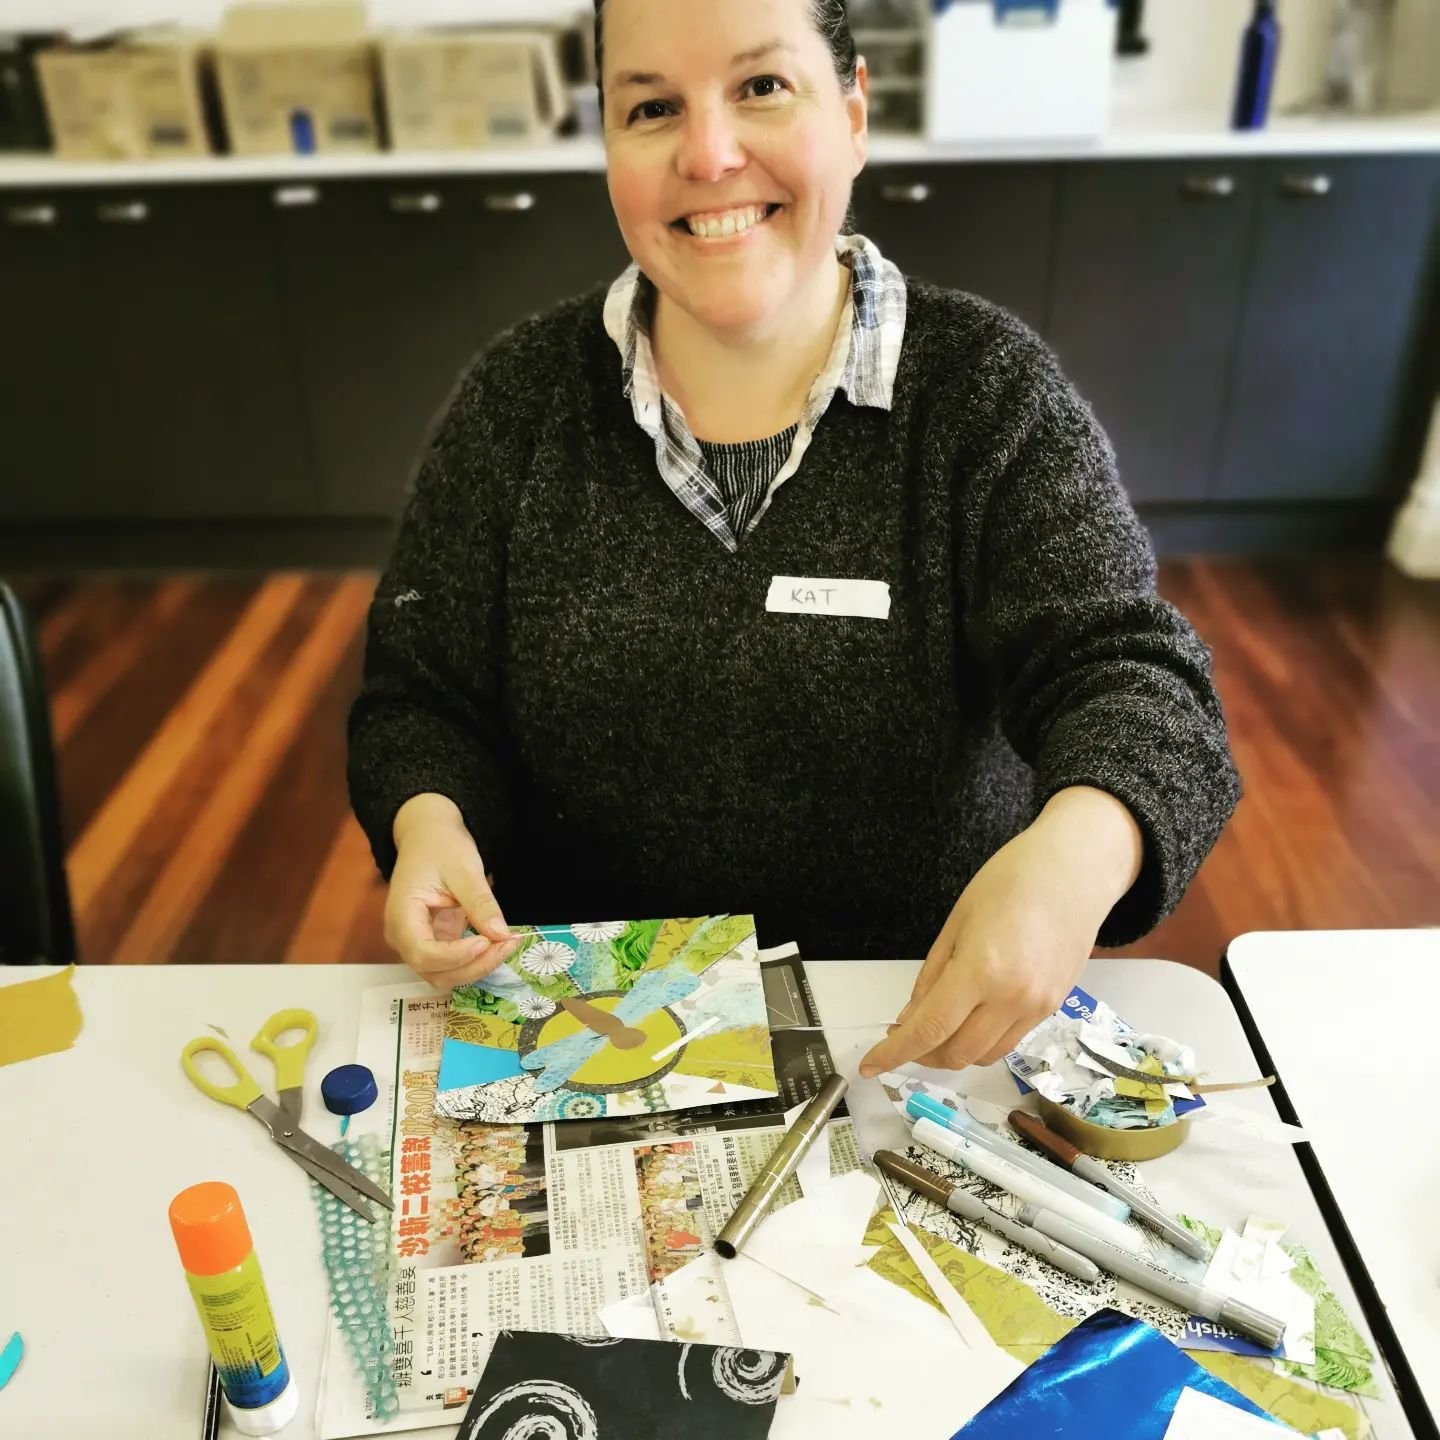 Another fabulous paper collage workshop for SALT Festival this morning. Lovely ladies getting creative, making art and new connections...was really nice 😊🎨💕
And good to see I've sold a few pieces in my Paper Sun exhibition....it'll be coming off t